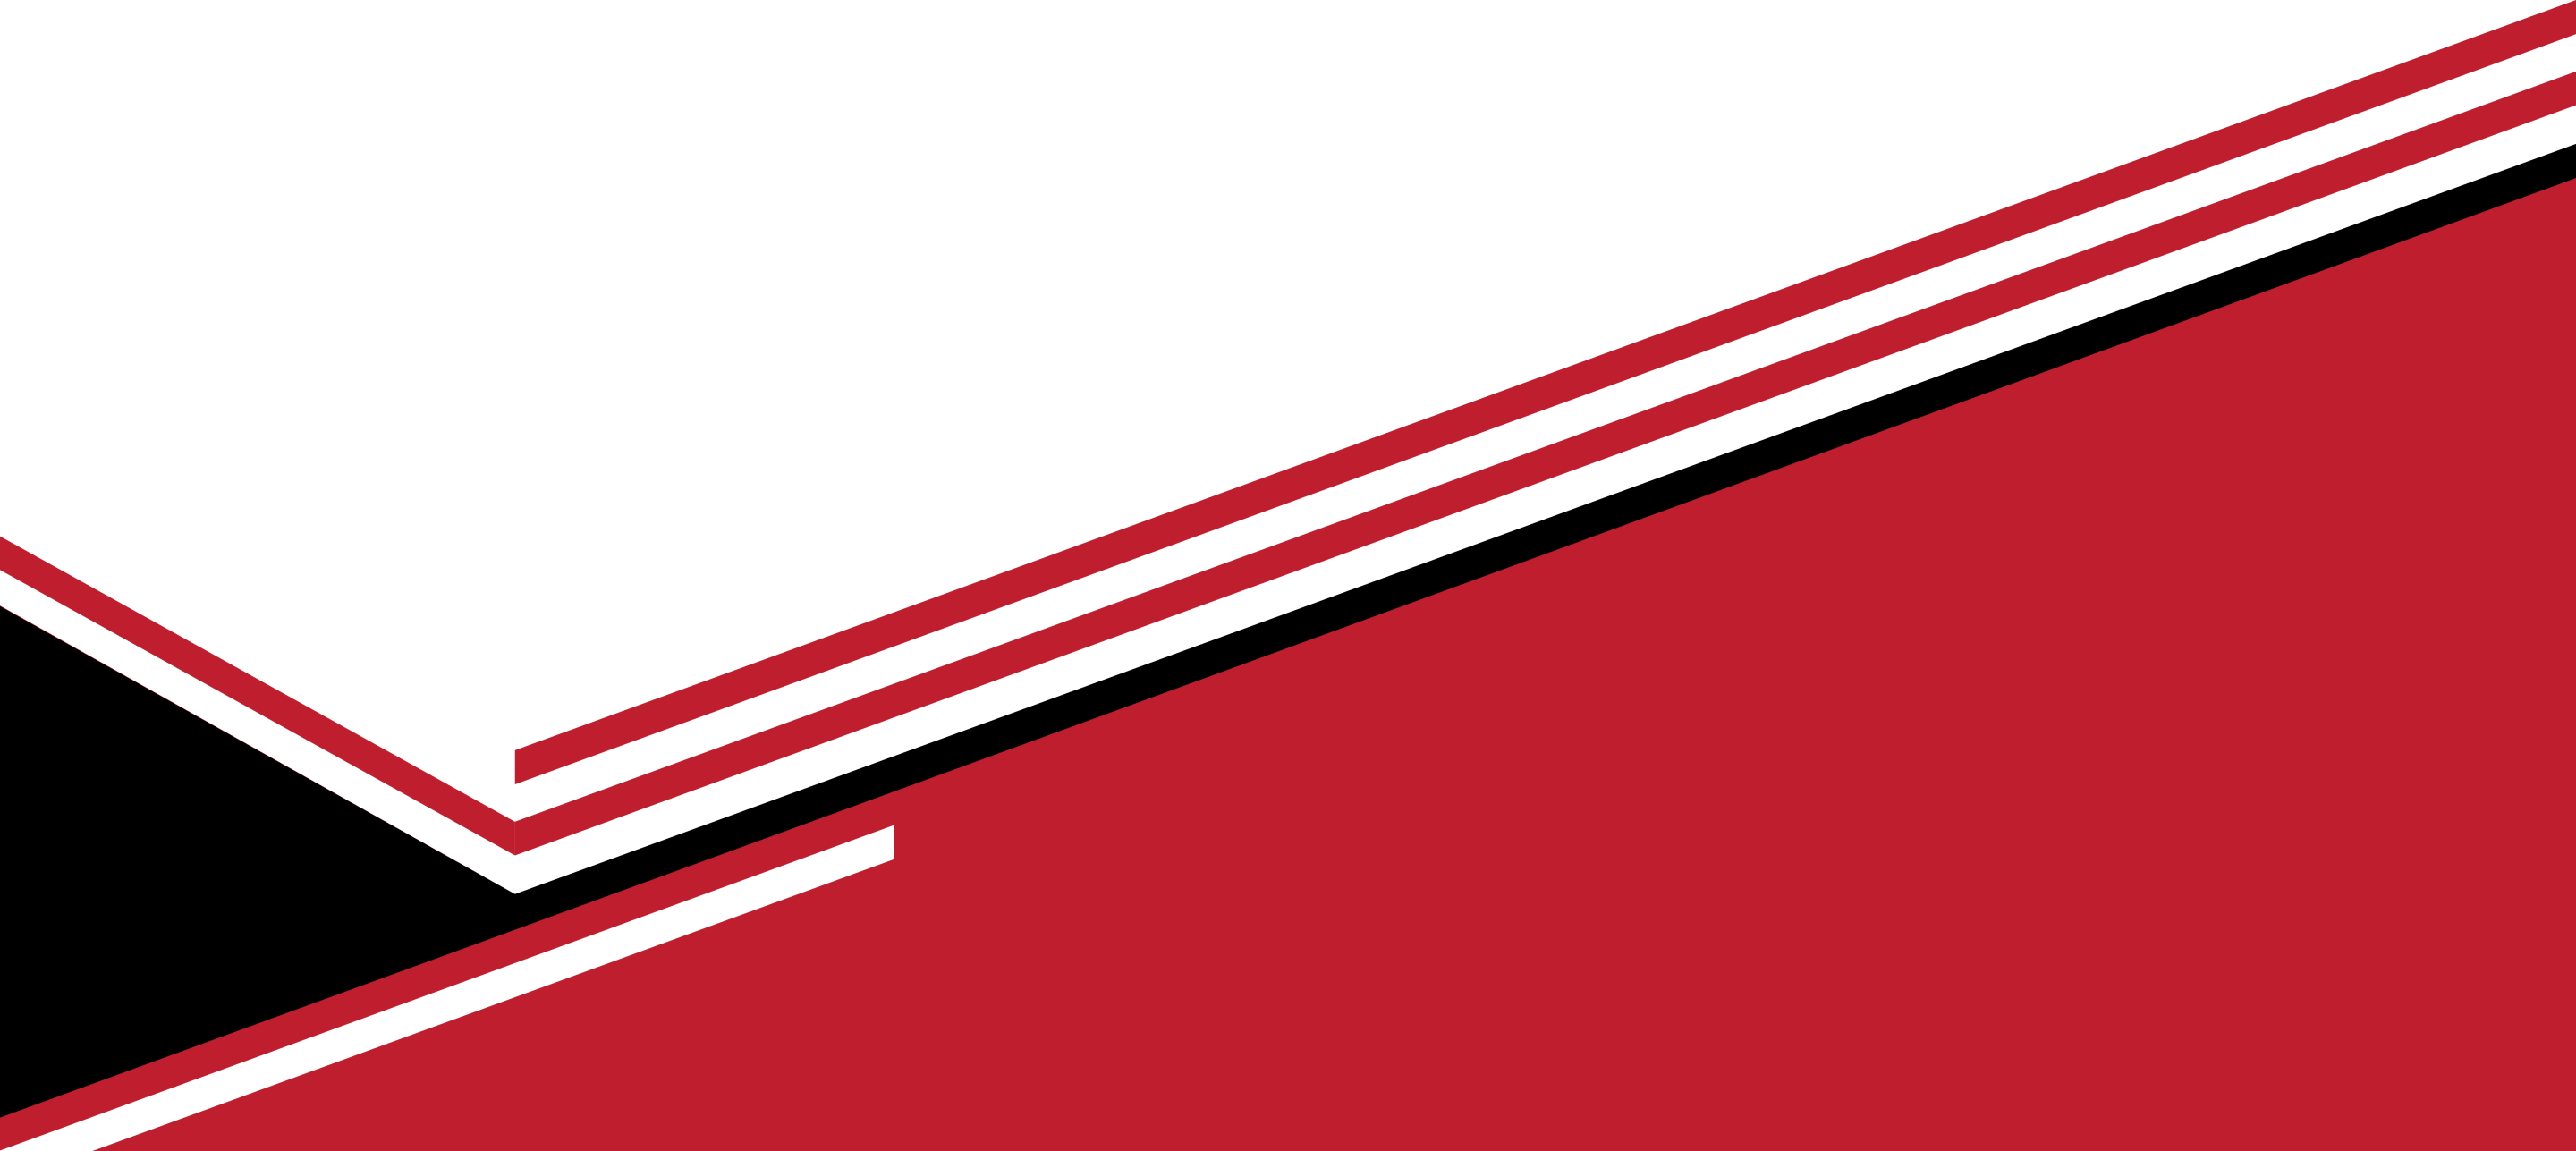 All Makes And Models Red Line Background Vector Free Transparent Png